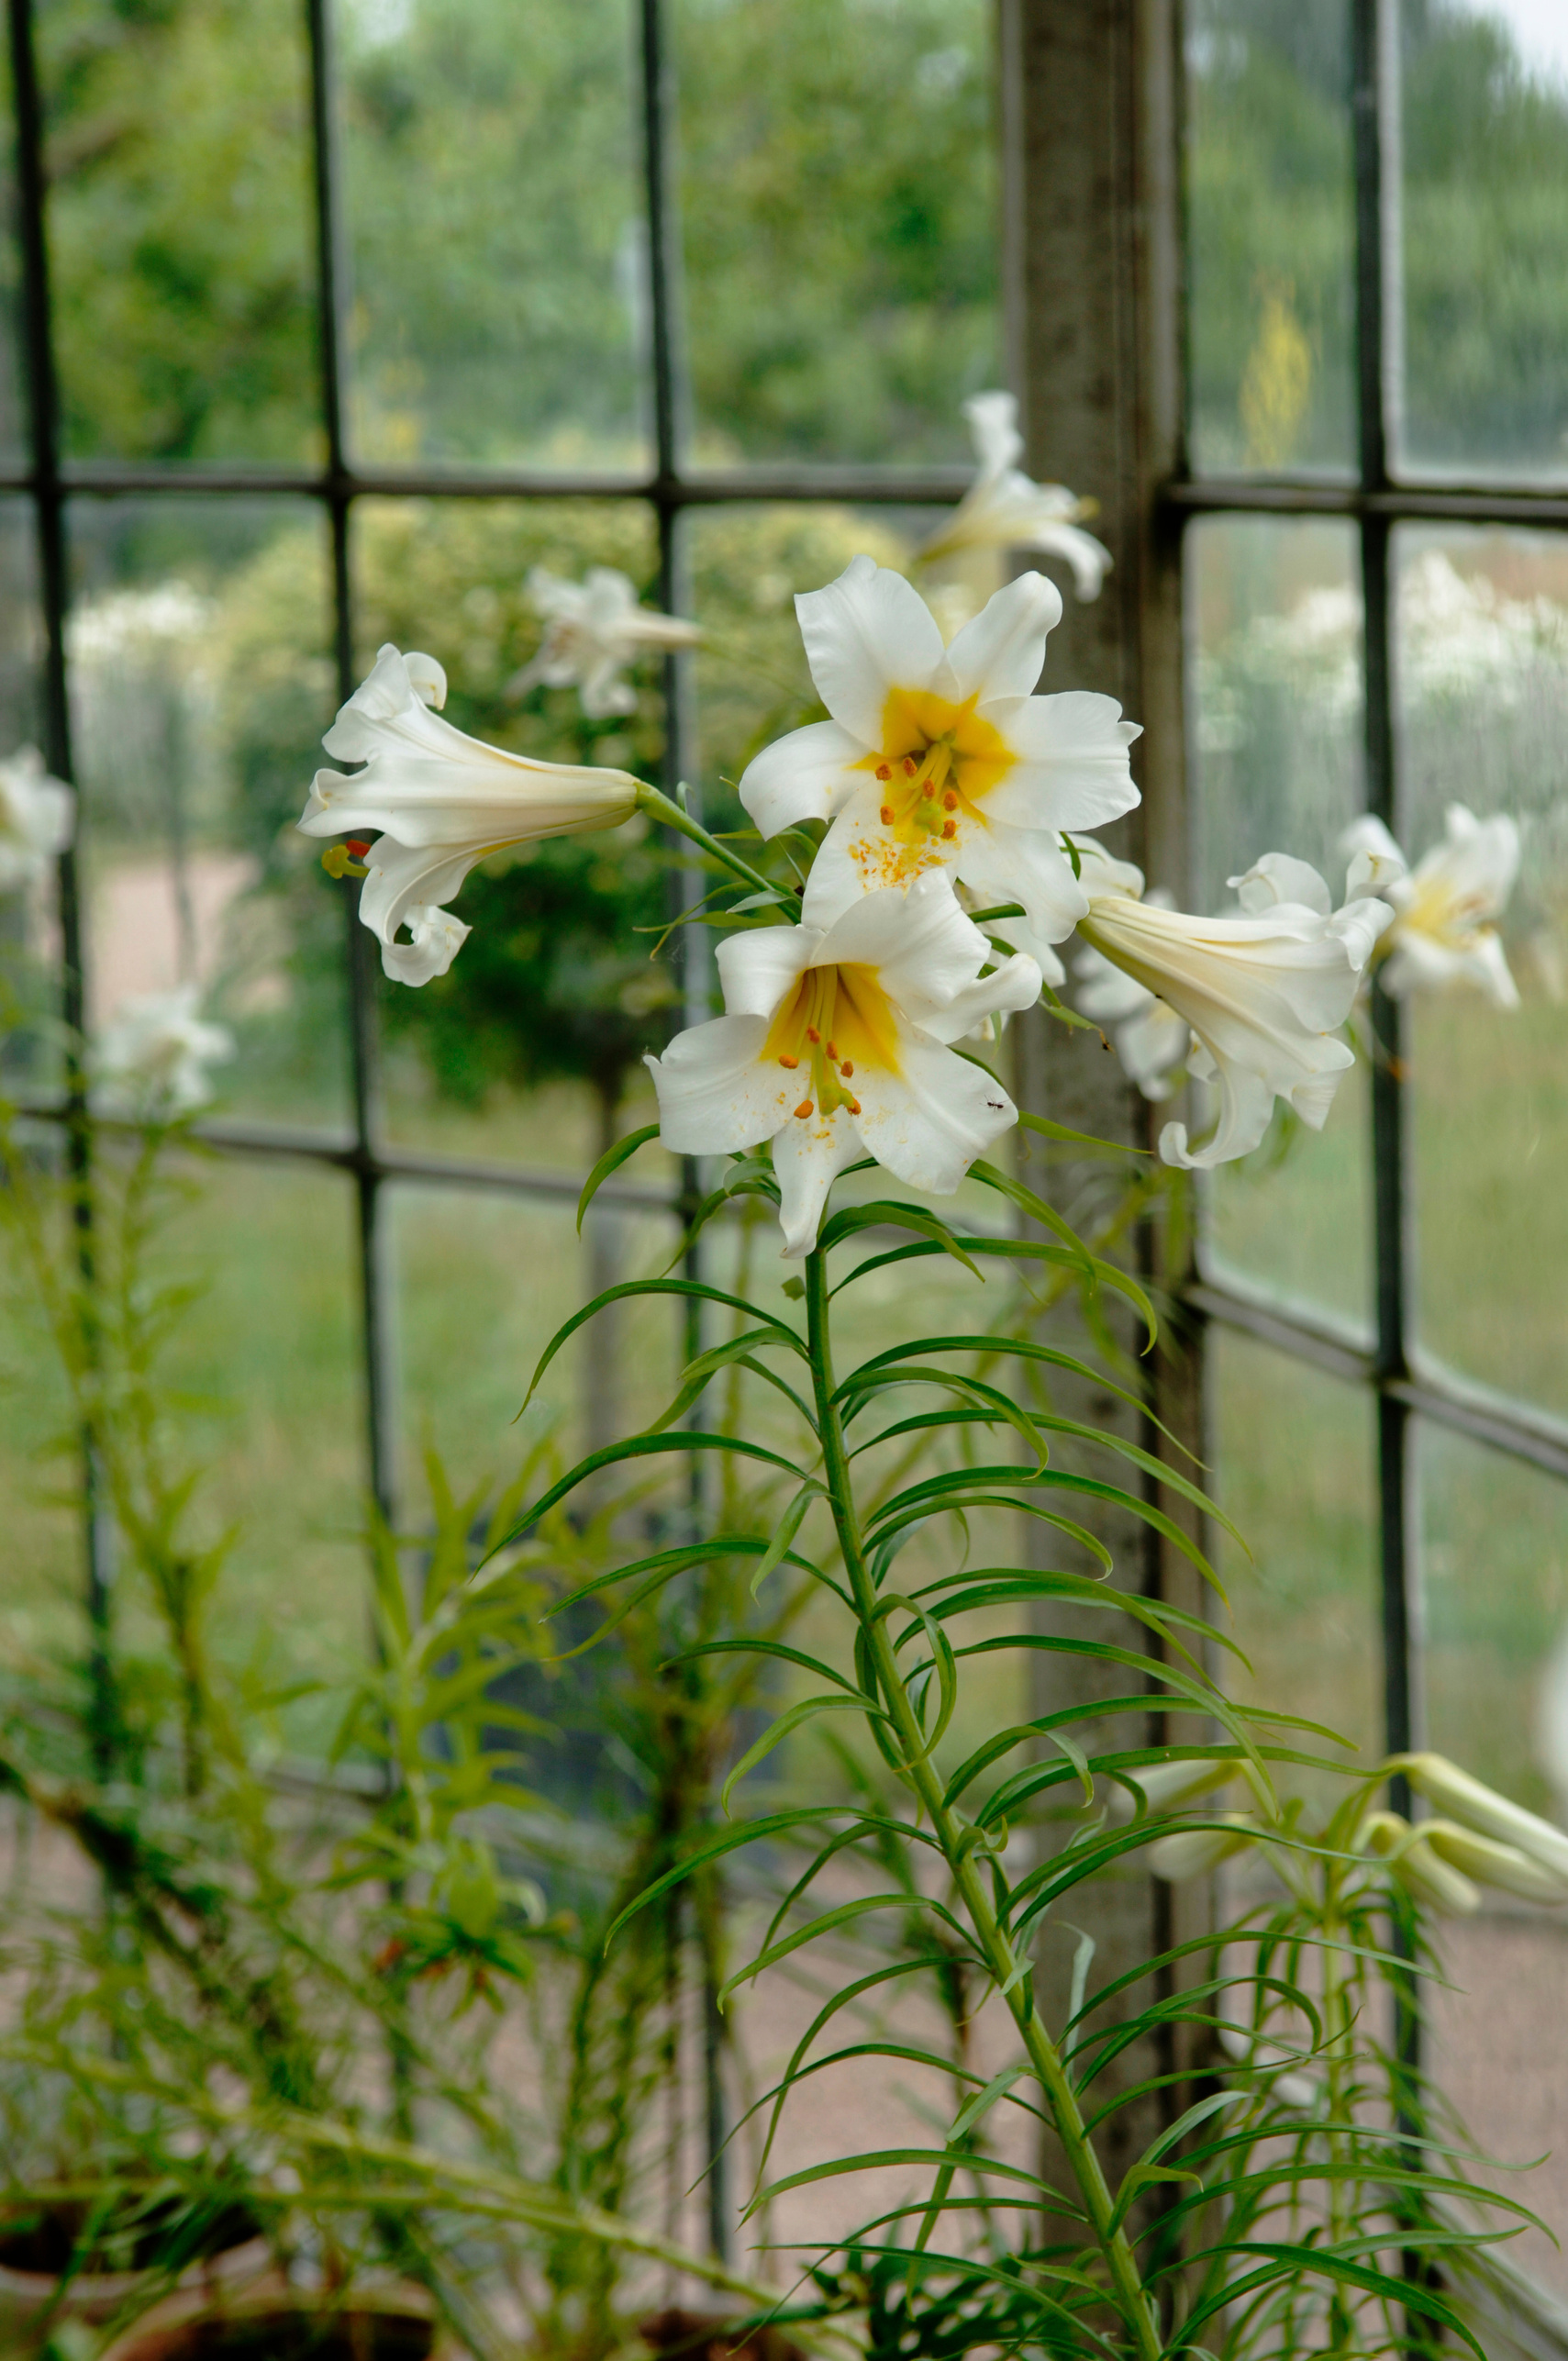 Lilies Inside old greenhouse.